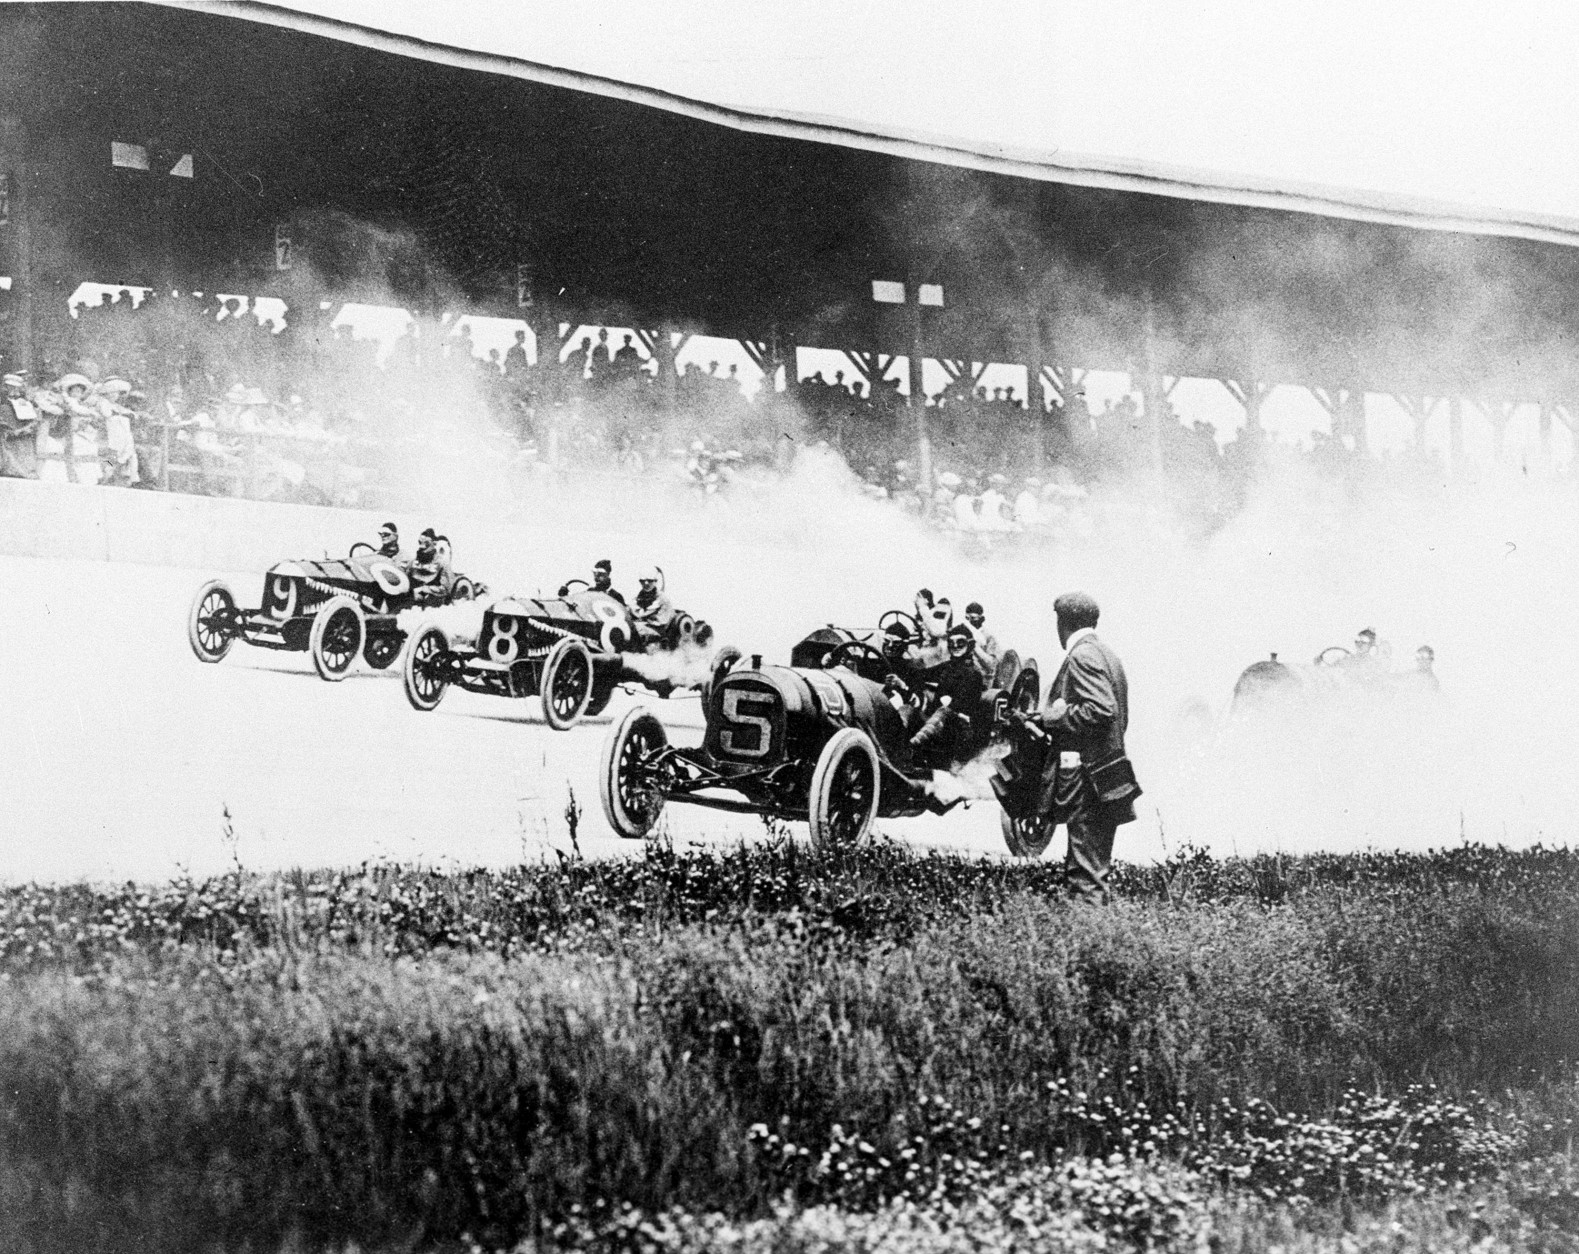 Drivers speed into the first turn on the Brickyard in the first Indianapolis 500-mile race in Indianapolis, Ind., Thursday, May 30, 1911.  The drivers from left are, Will Jones (9) driving a Case; Joe Jagersberger (8) in a Case; and Louis Disbrow (5) in a Pope-Hartford. Ray Harroun won the race at an average speed of 74.602 miles per hour.  (AP Photo)